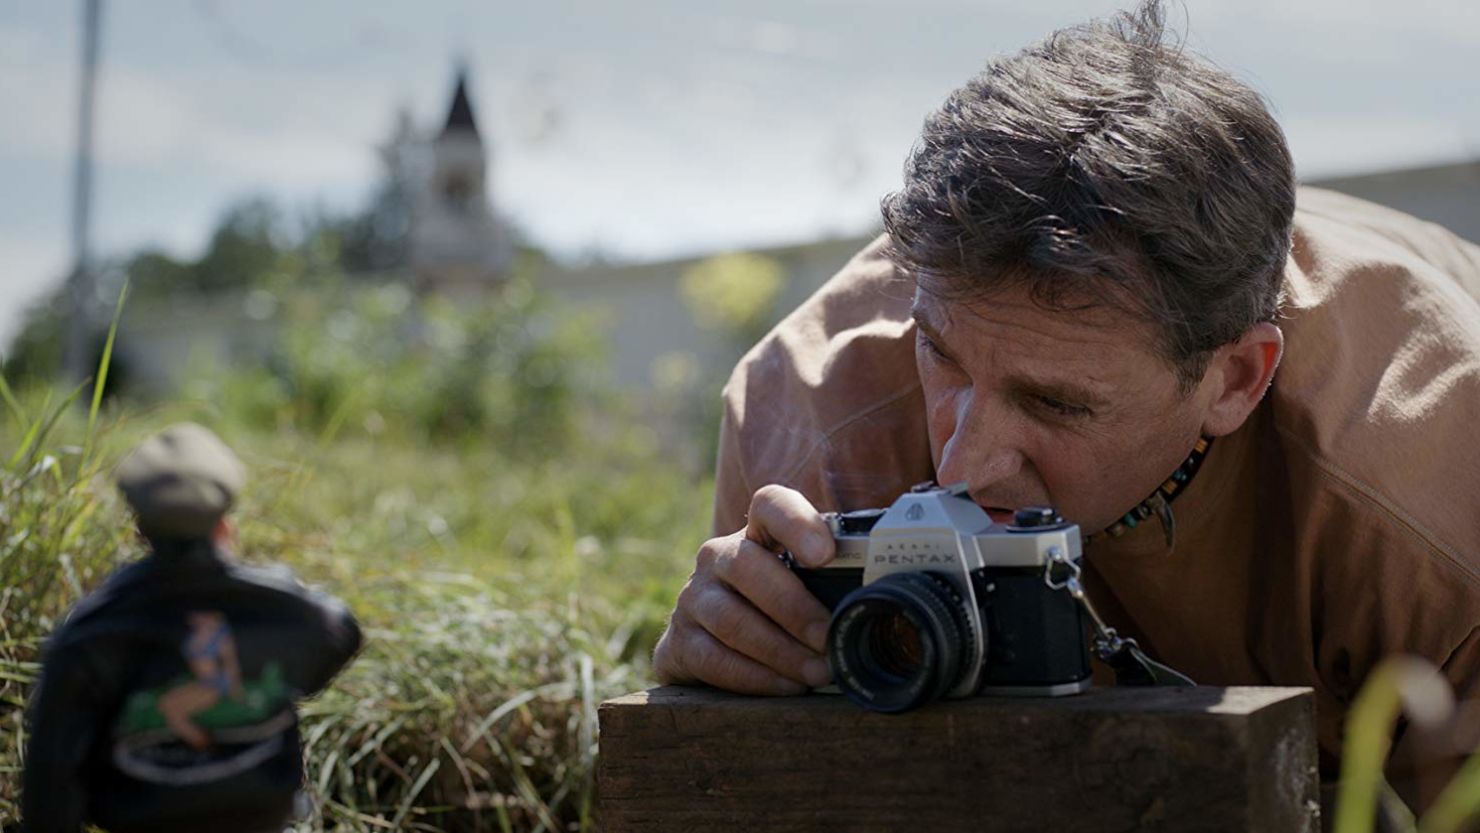 Steve Carell plays a photographer who builds an imaginary Belgian town using dolls to help himself heal.